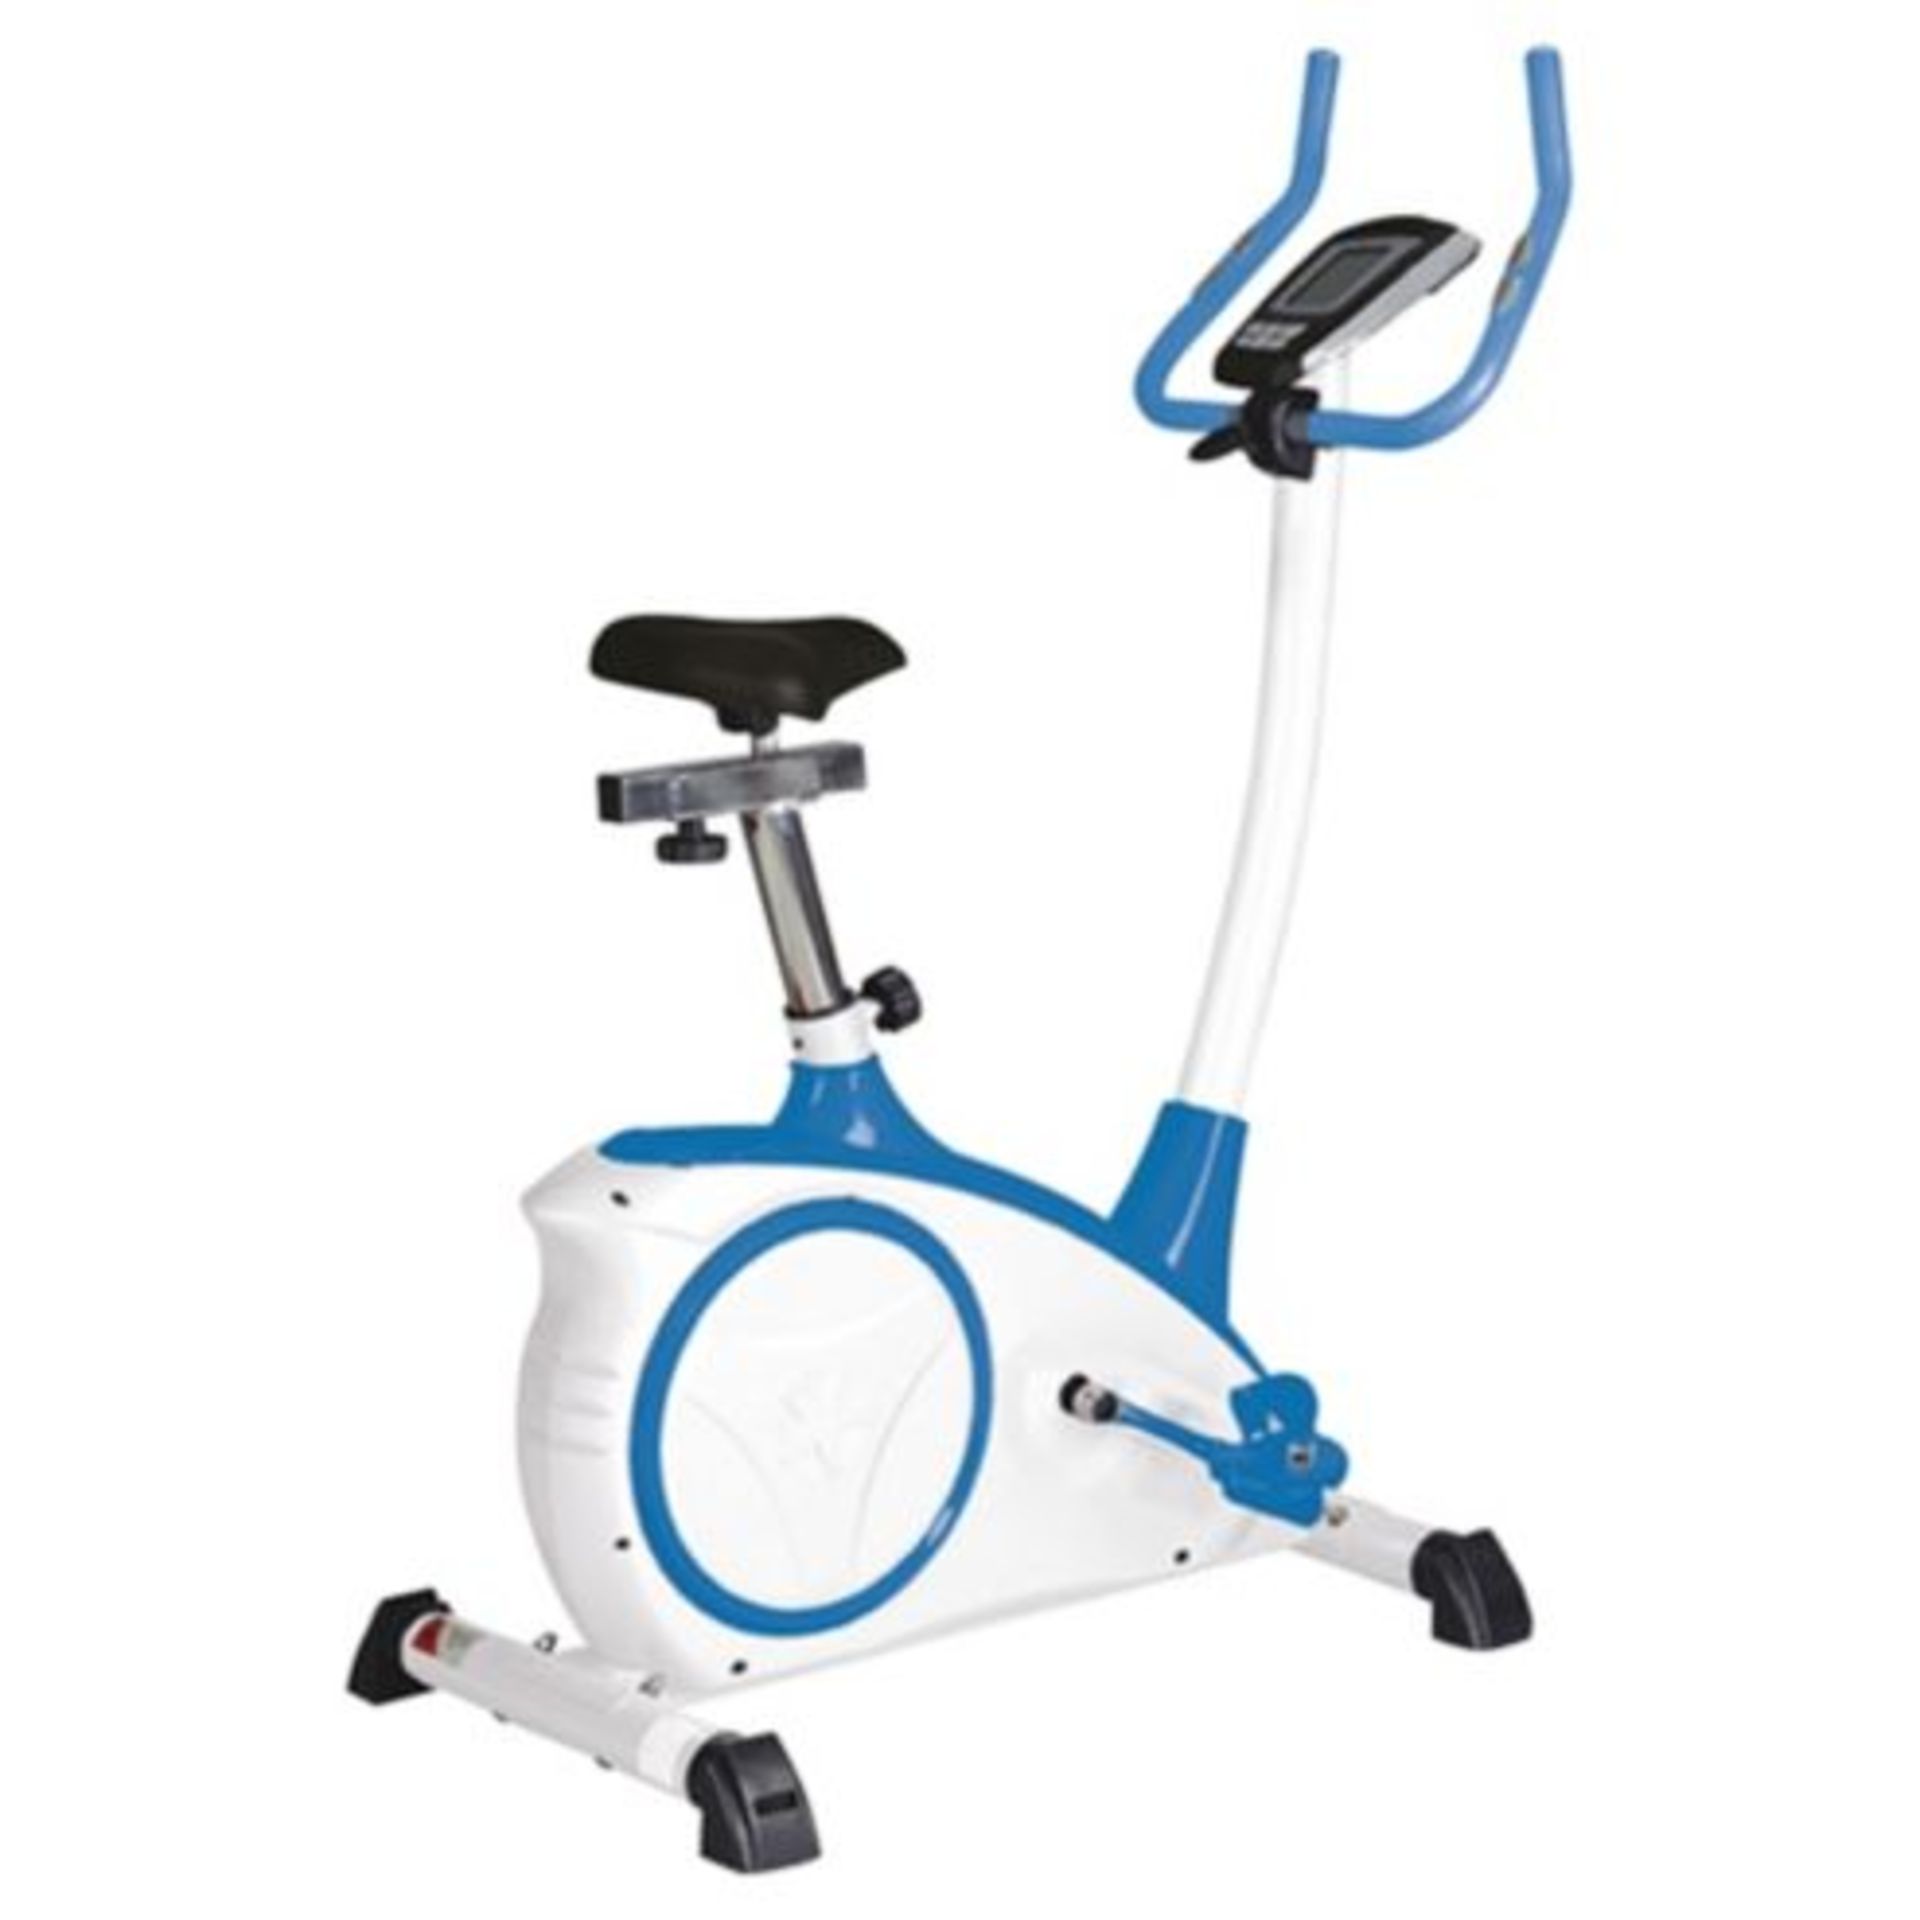 V Brand New Magnetic Exercise Bike With LCD Screen Displaying Heart Rate, Speed, Distance and - Image 2 of 3